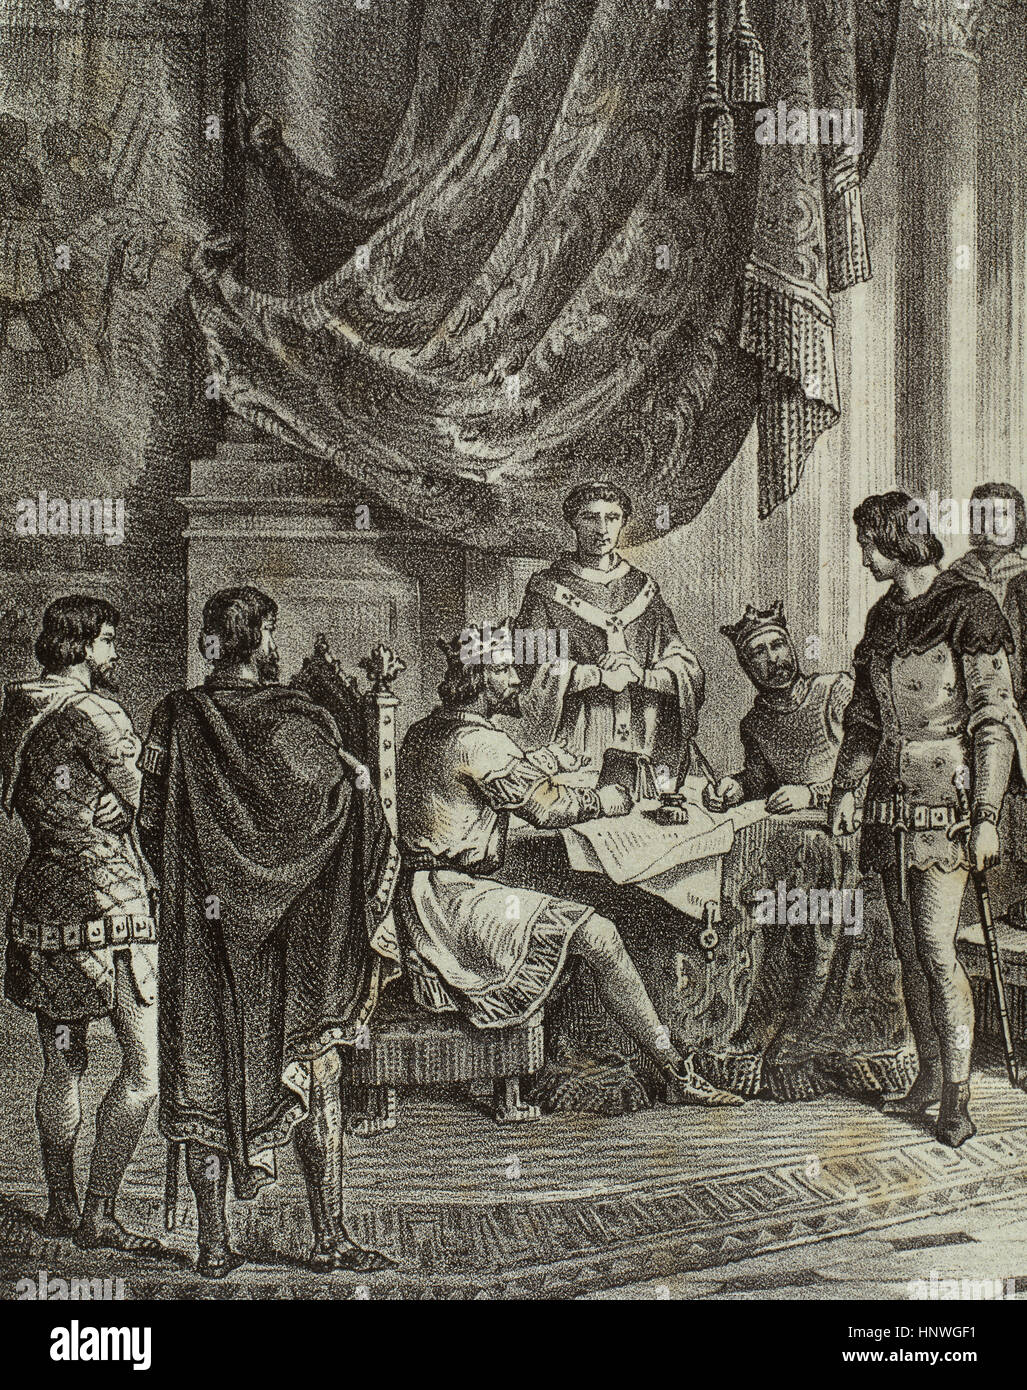 Agreement of Oloron signed on July 27th, 1287 in Oloron-Sainte-Marie (France) between the king Alfonso III of Aragon, called The Liberal (1265-1291) and Edward I of England (1239-1307).  'Historia de España'. Engraving.19th century. Stock Photo